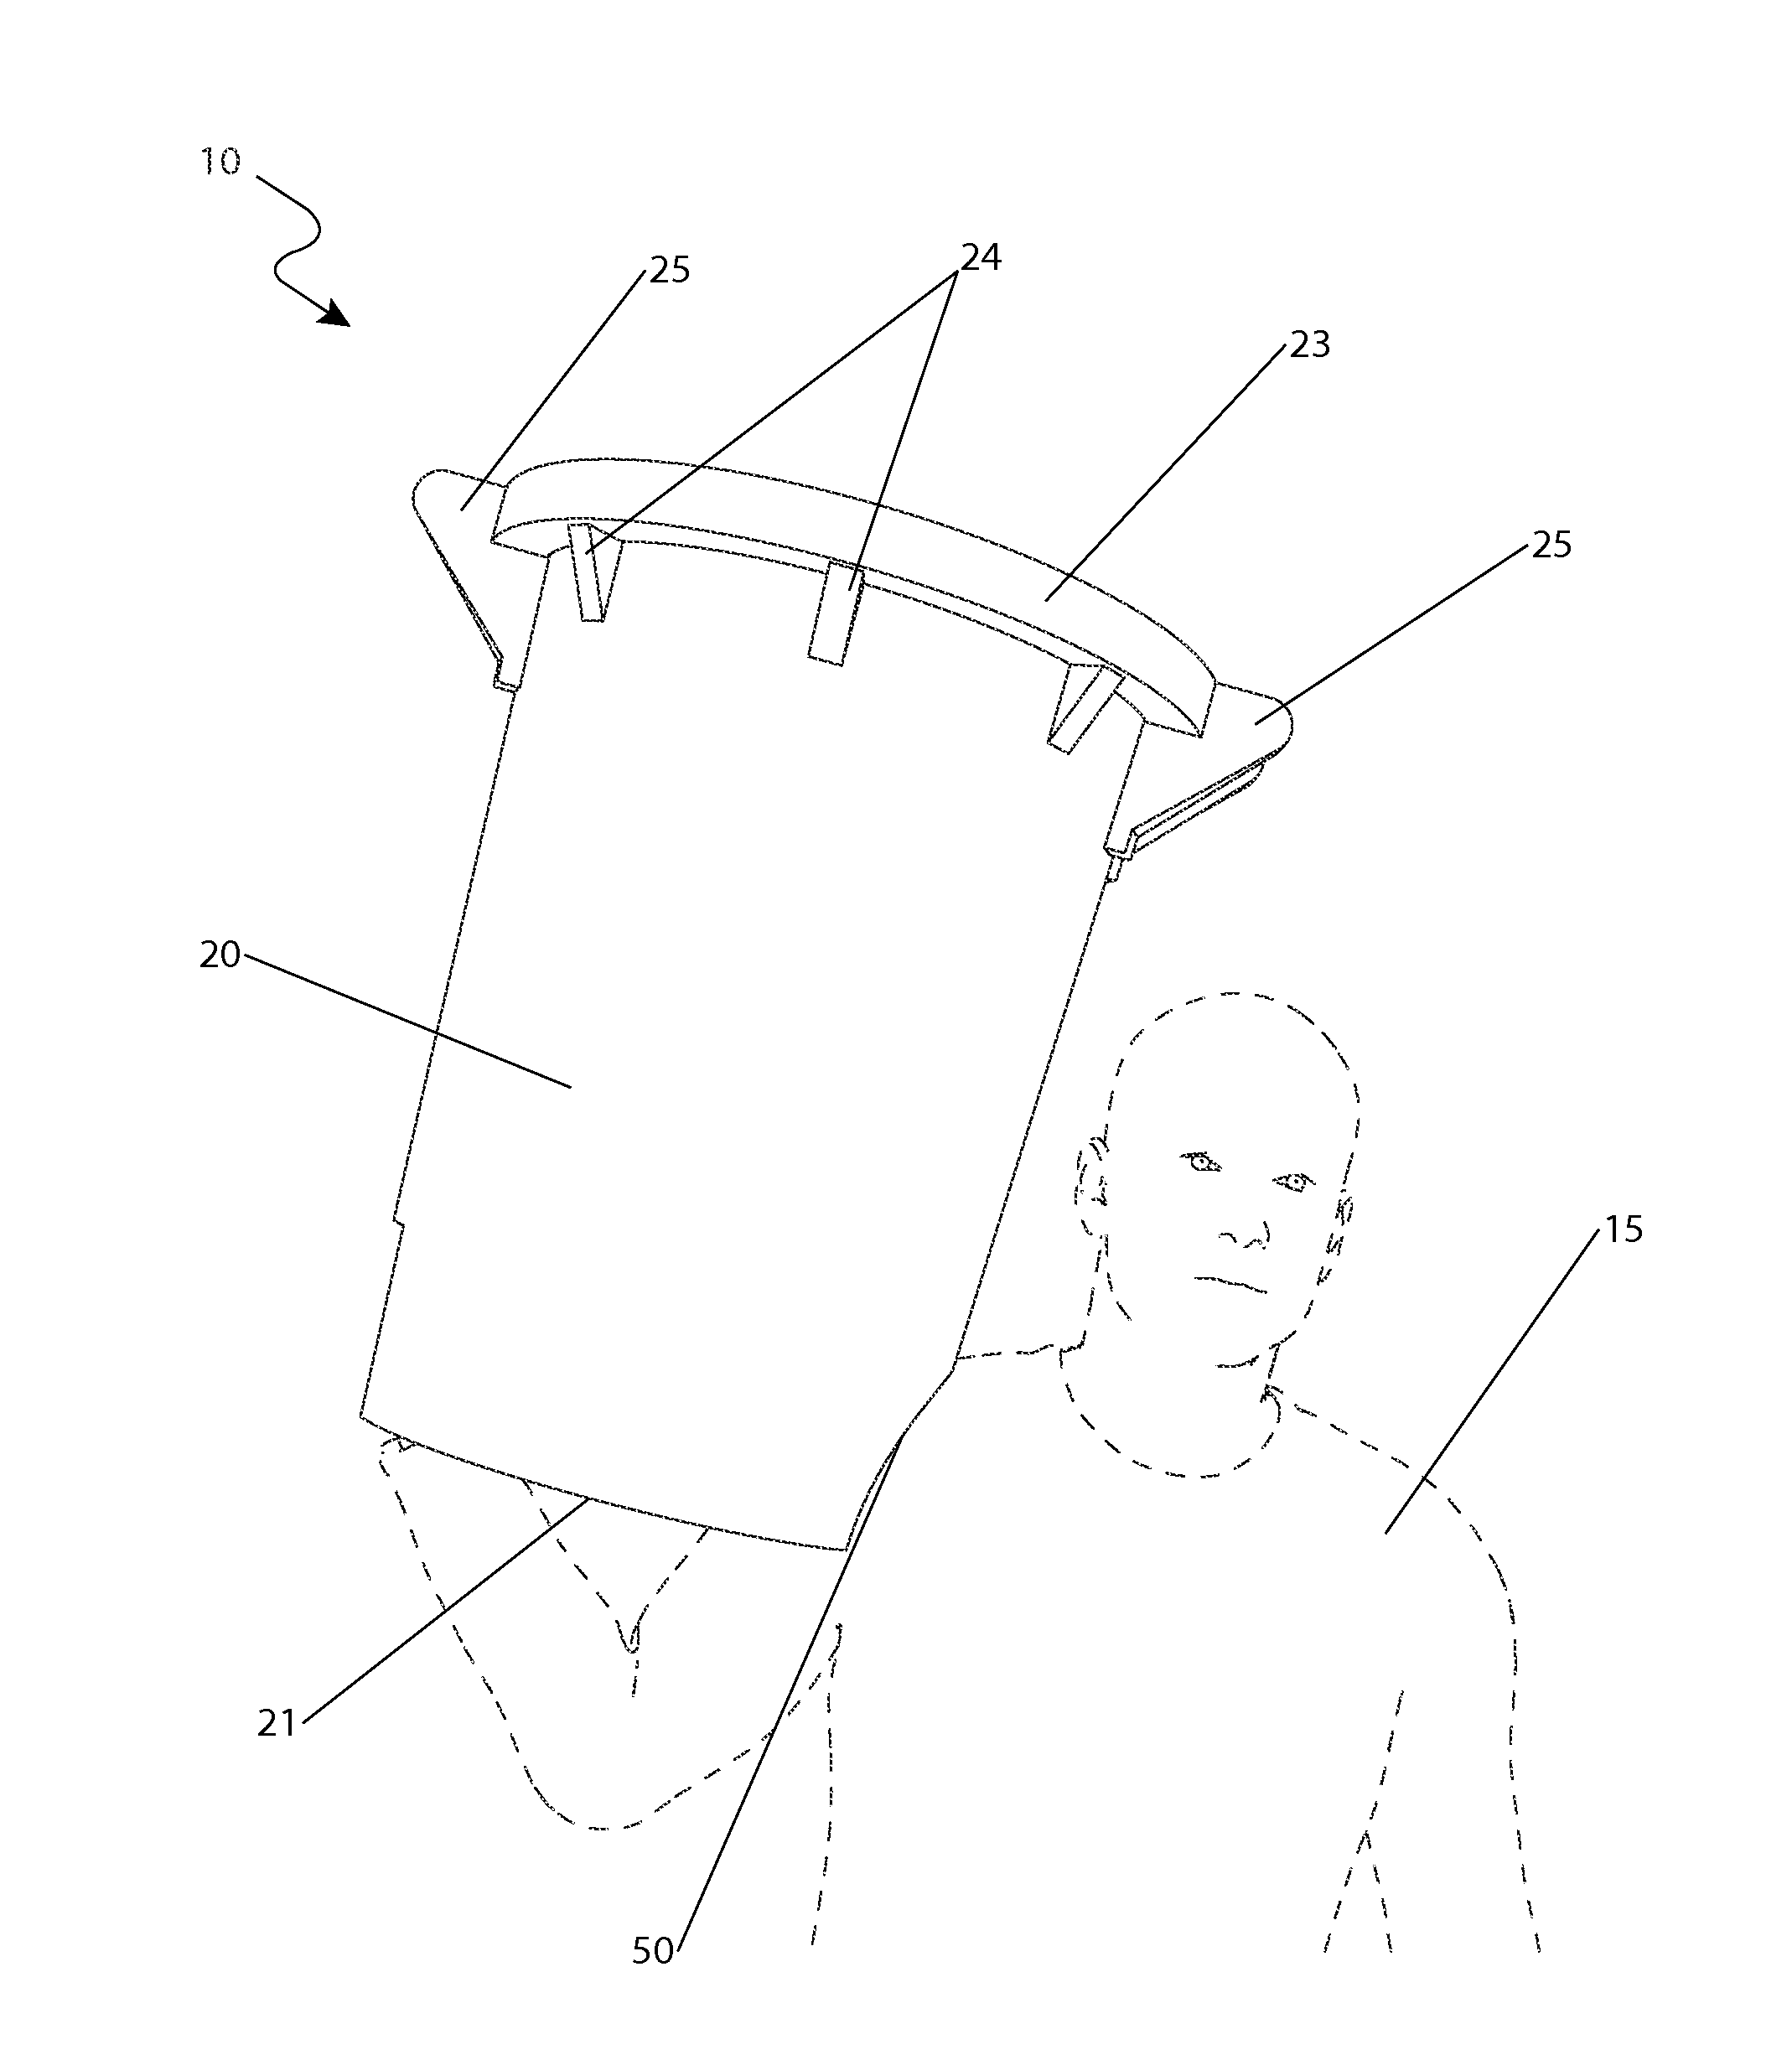 Refuse Container with Handling Features